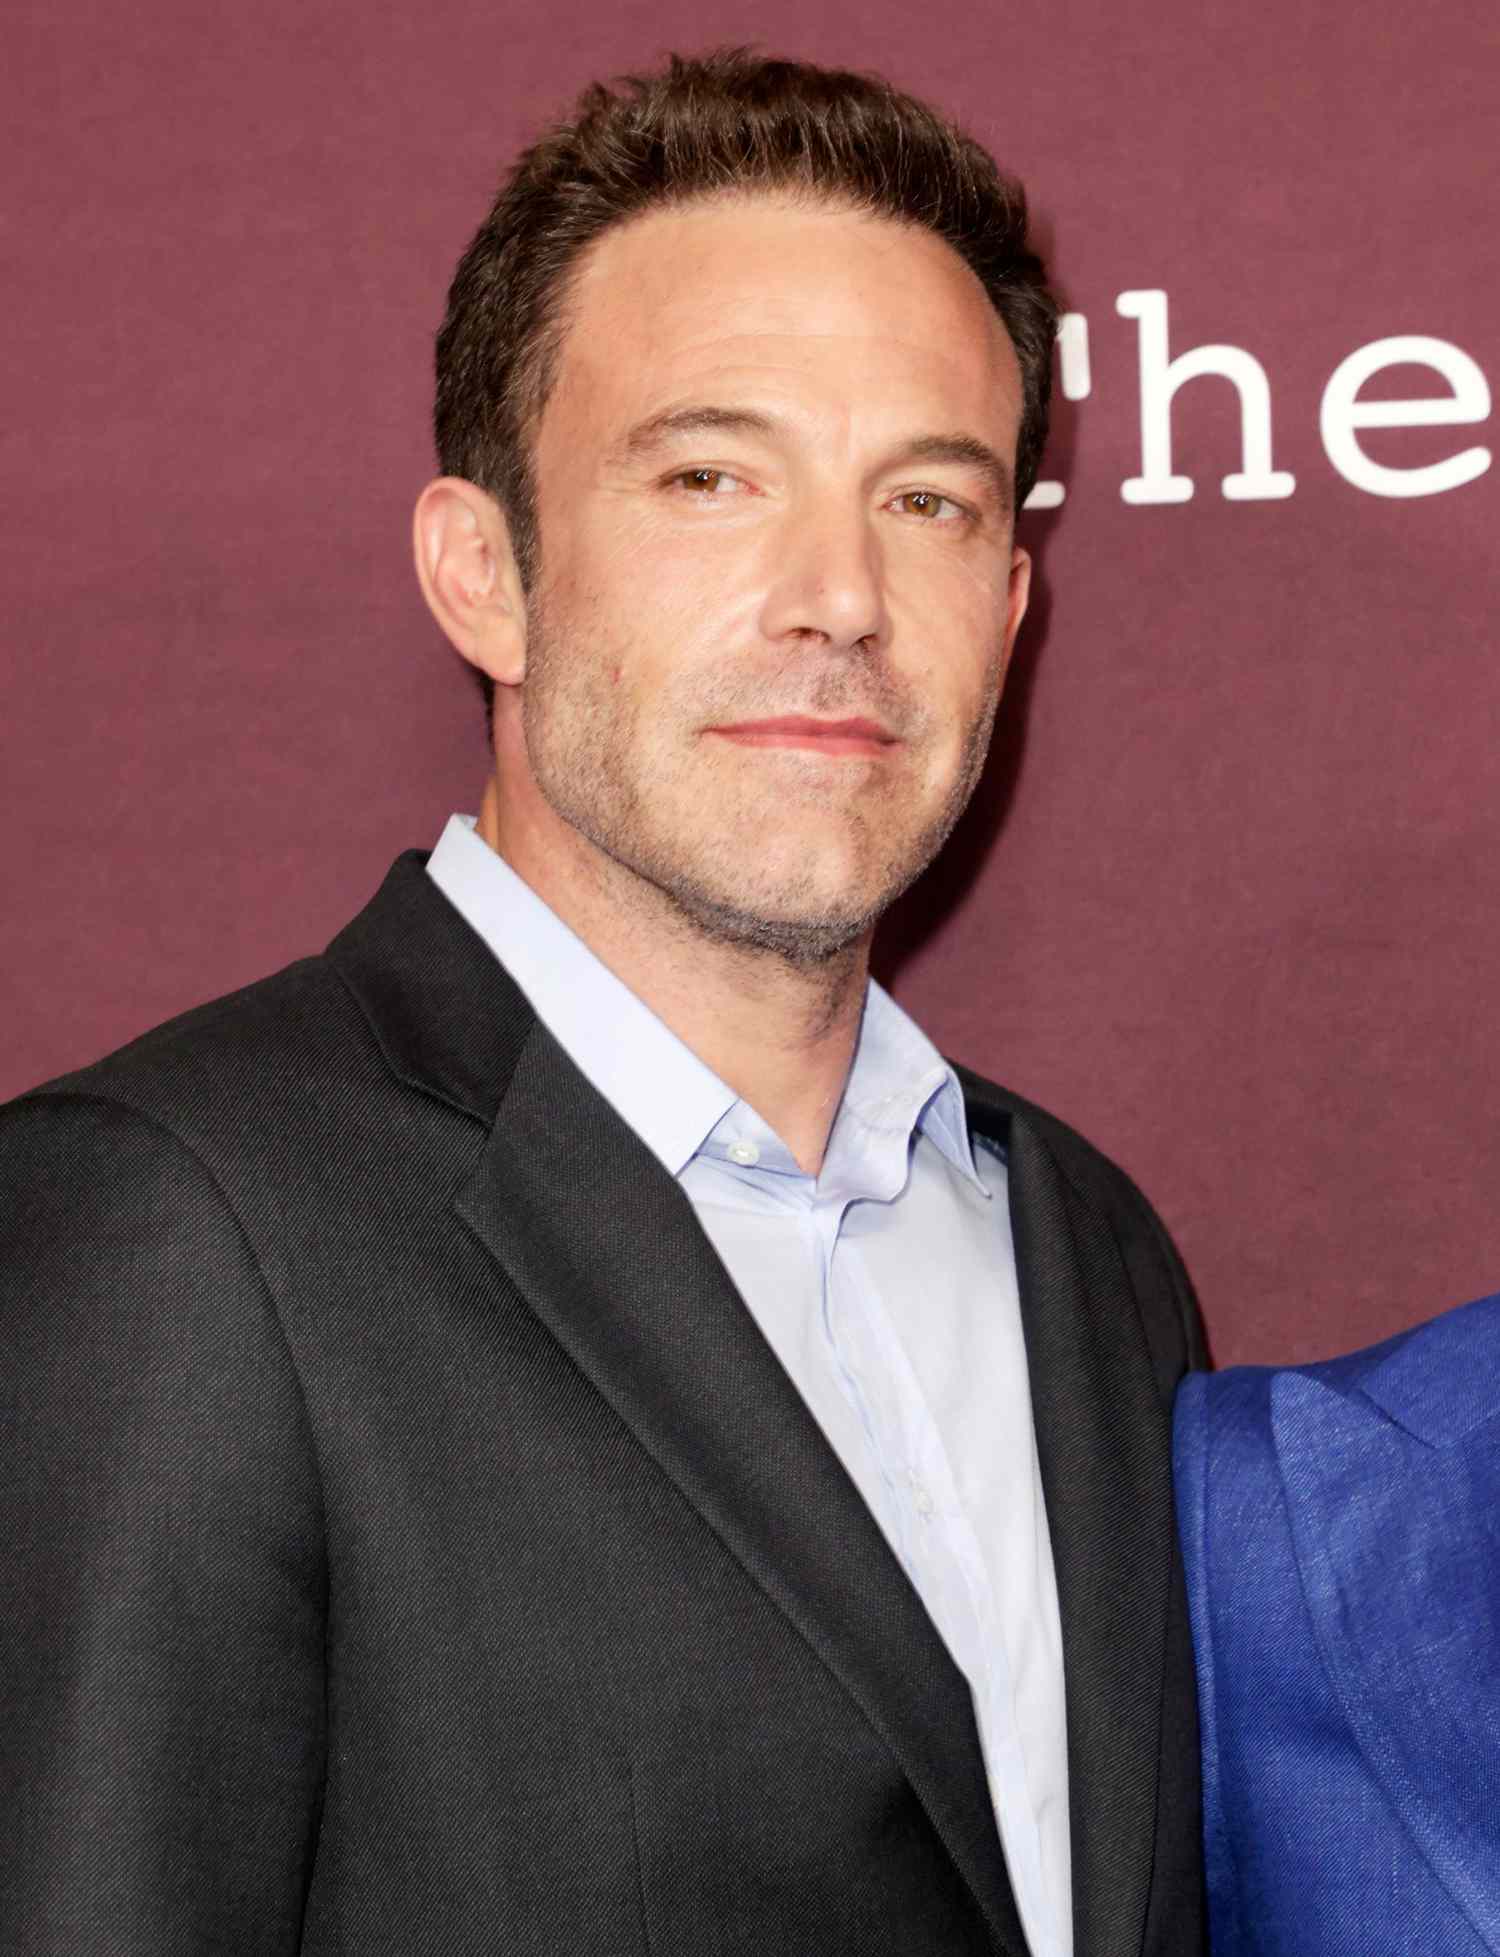 Ben Affleck attends the Los Angeles Premiere of "텐더 바" presented by Amazon Studios at DGA Theater Complex on October 03, 2021 로스앤젤레스에서